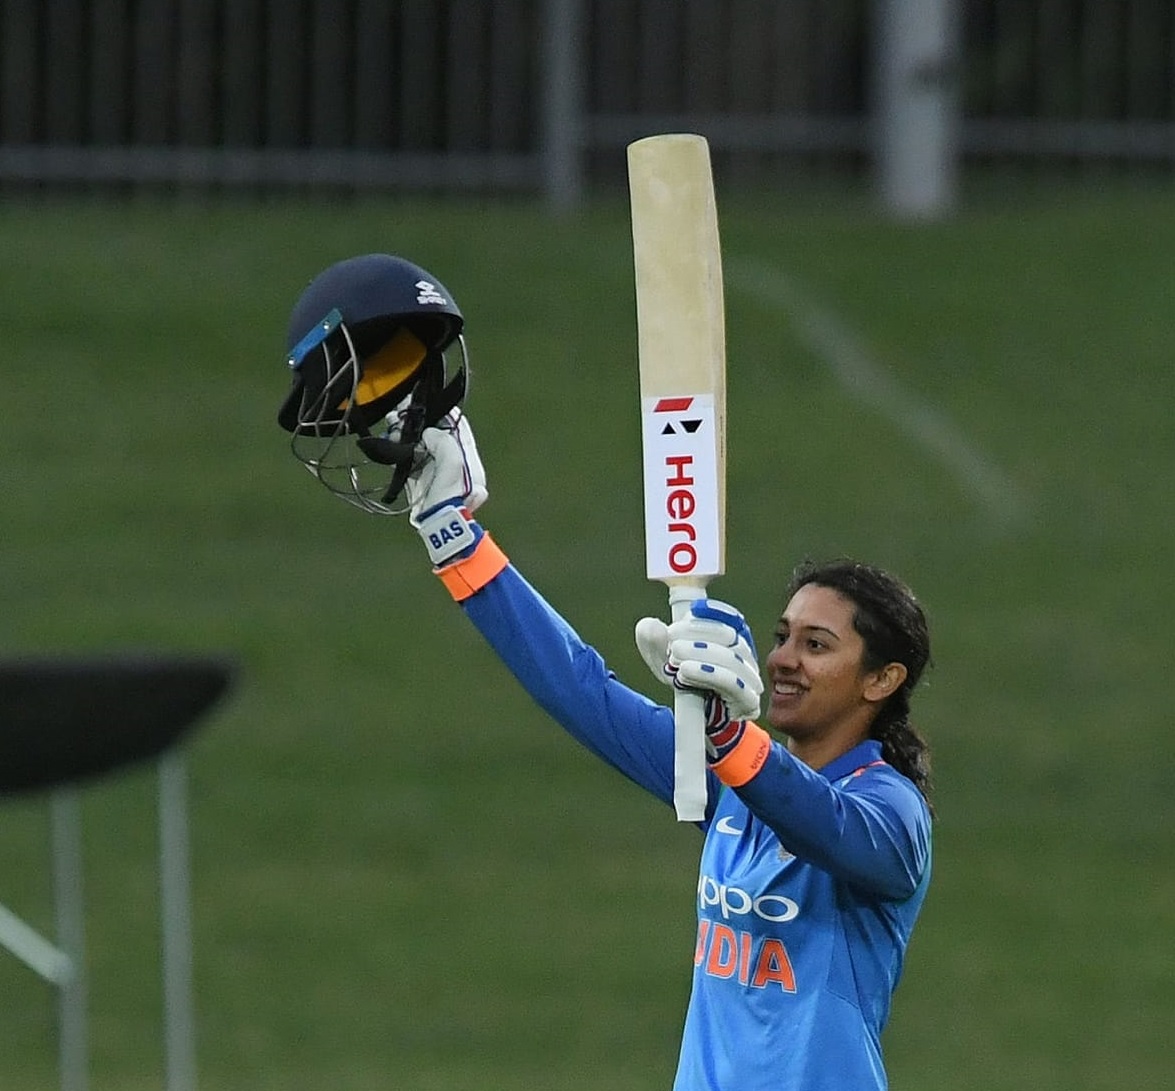 Women’s IPL will be great for Indian cricket, feels Mandhana